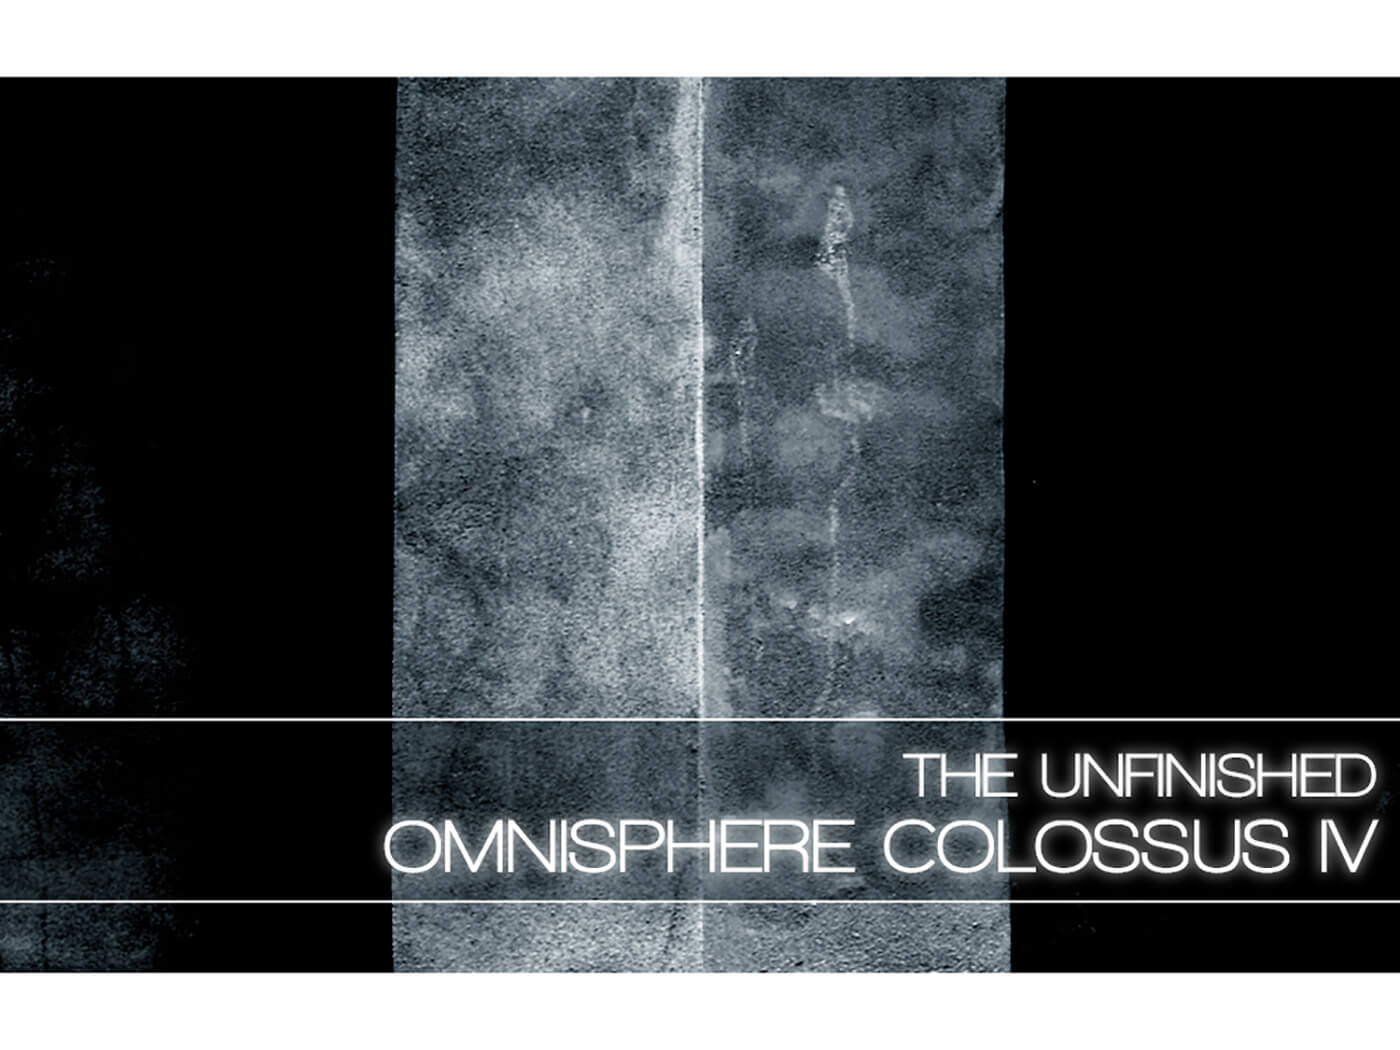 The Unfinished Omnisphere Colossus IV